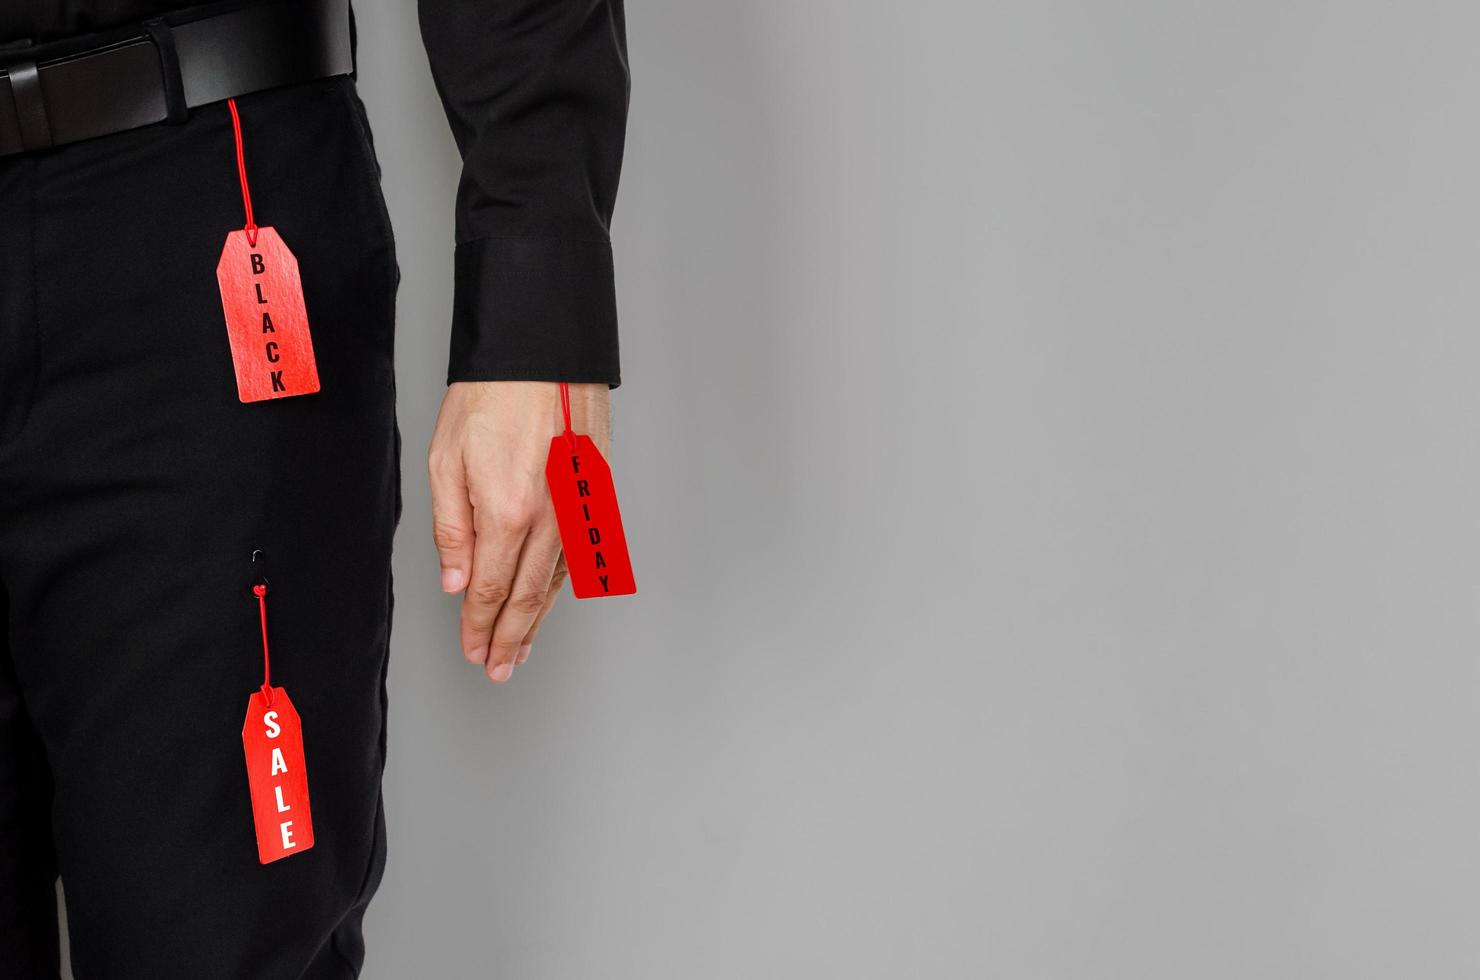 Men stuffs - black shirt, belt, long pants hanging with red price tags on gray background for Black Friday sale concept. photo